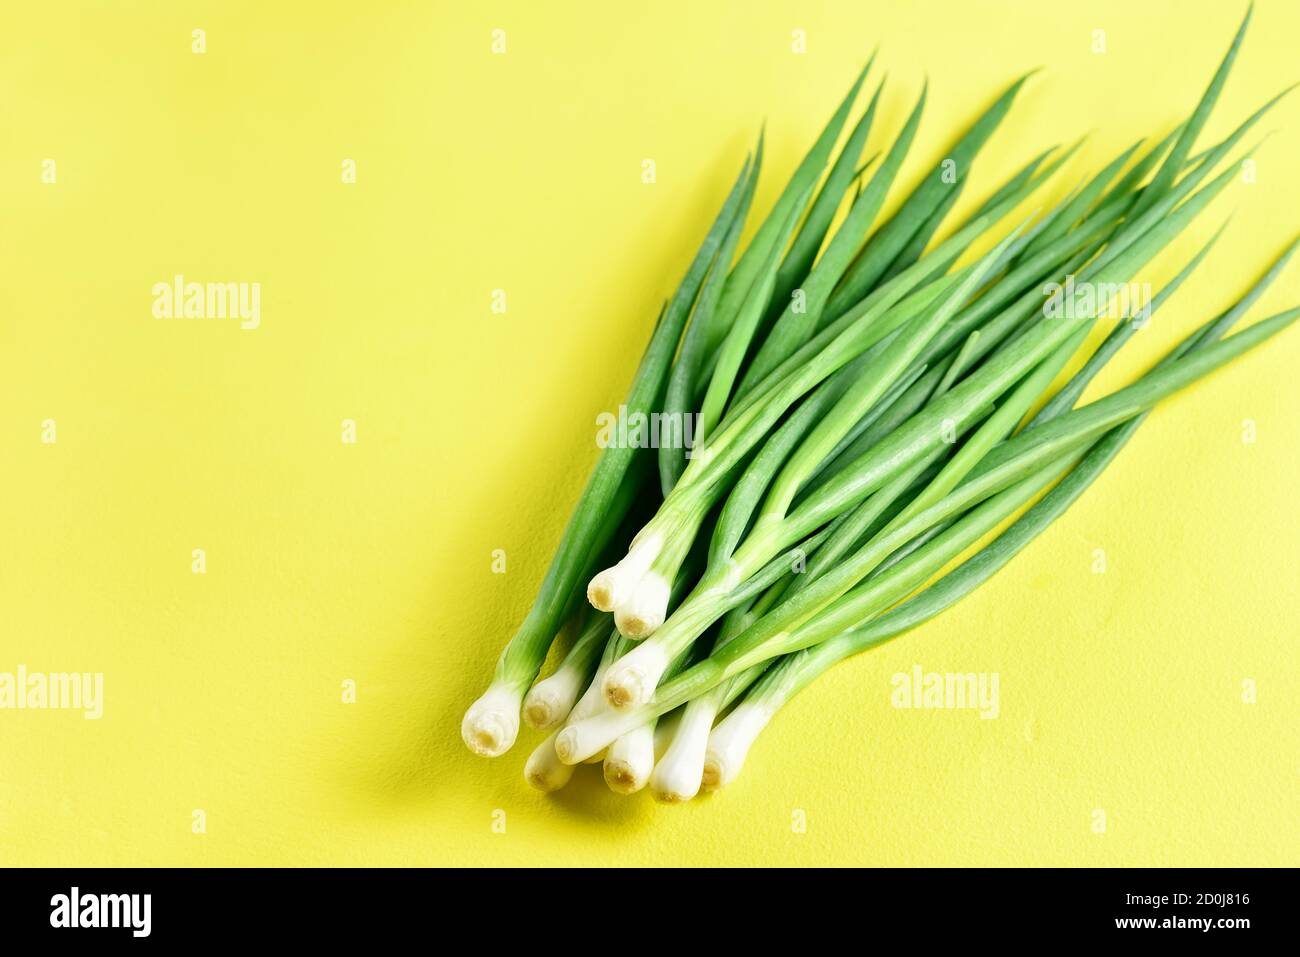 Fresh green onion on yellow background with free text space. Close up view Stock Photo